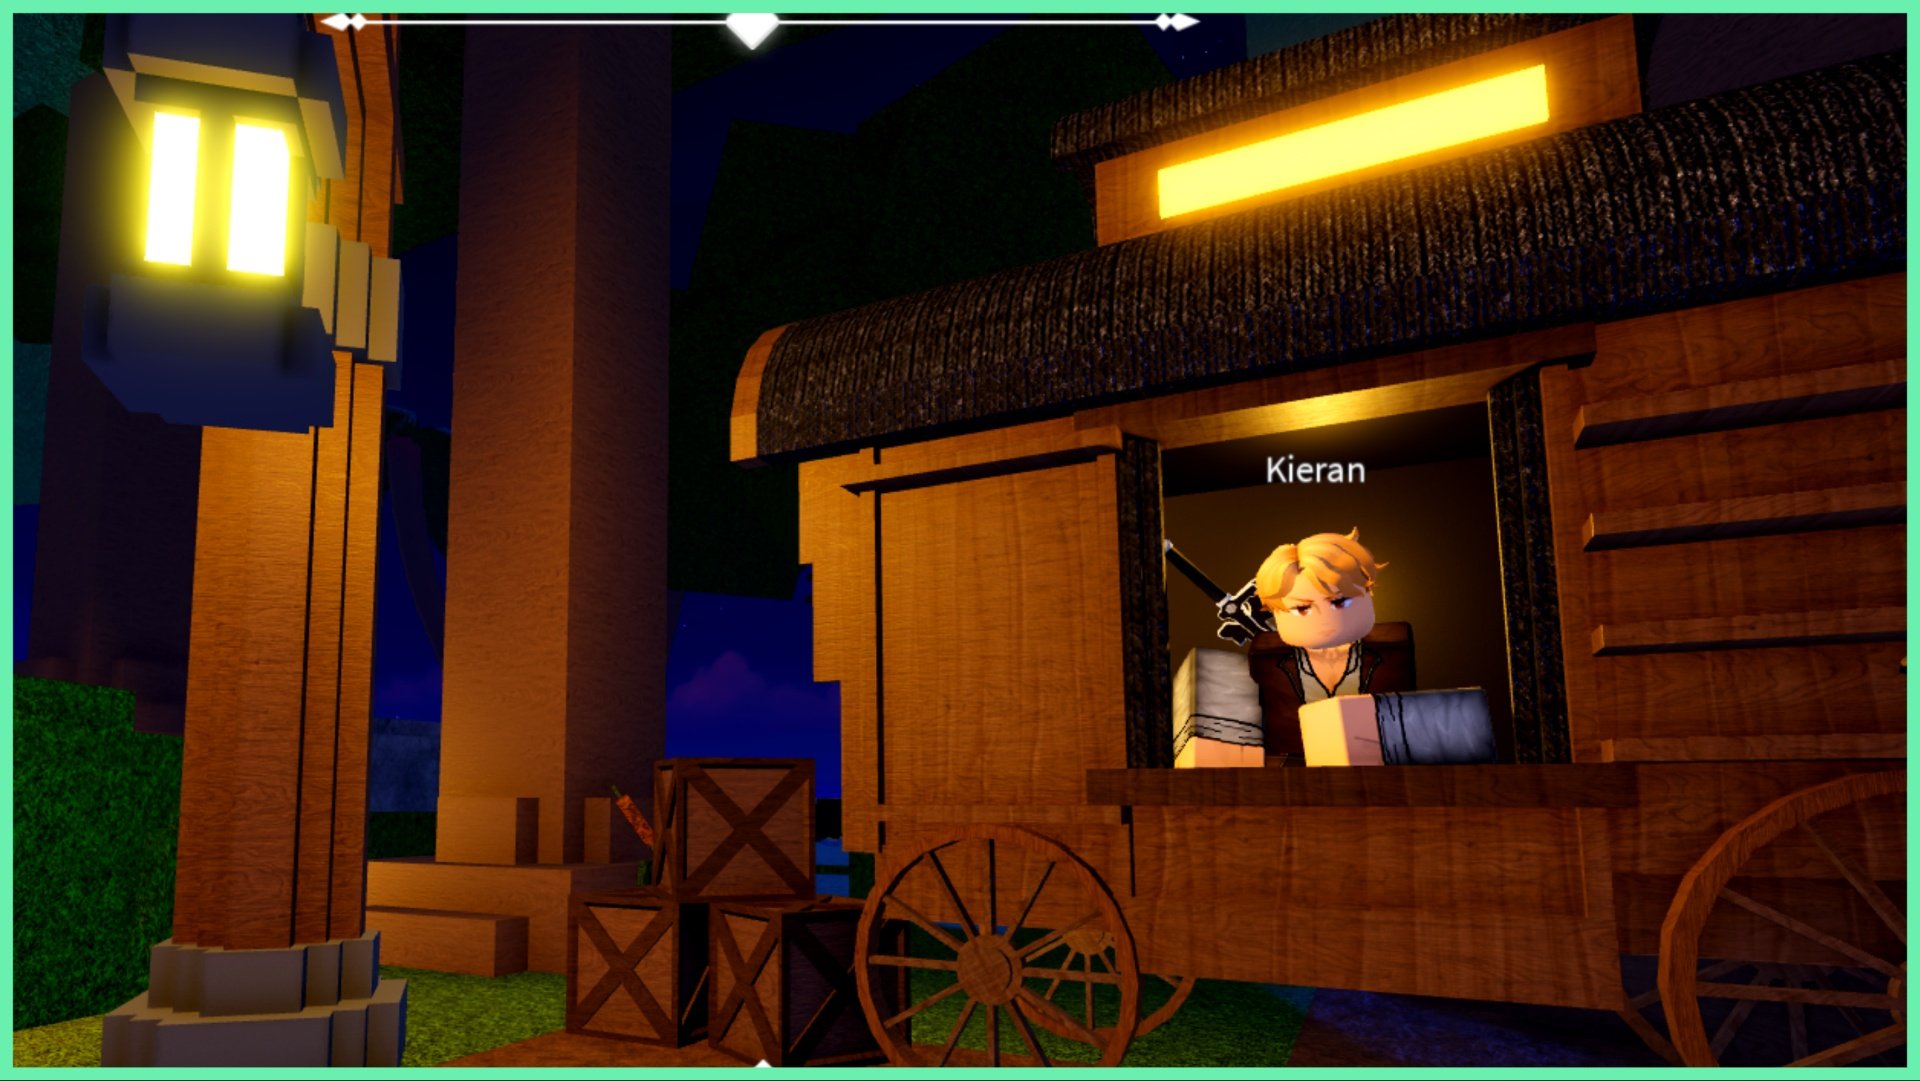 The image shows the crafting station which is a wooden shack with a male npc leaning out of a window from the inside facing the player. It is nighttime so the surrounding scenery is dark and hard to depict. The shack has an overcast lantern to illuminate the front in a golden hue